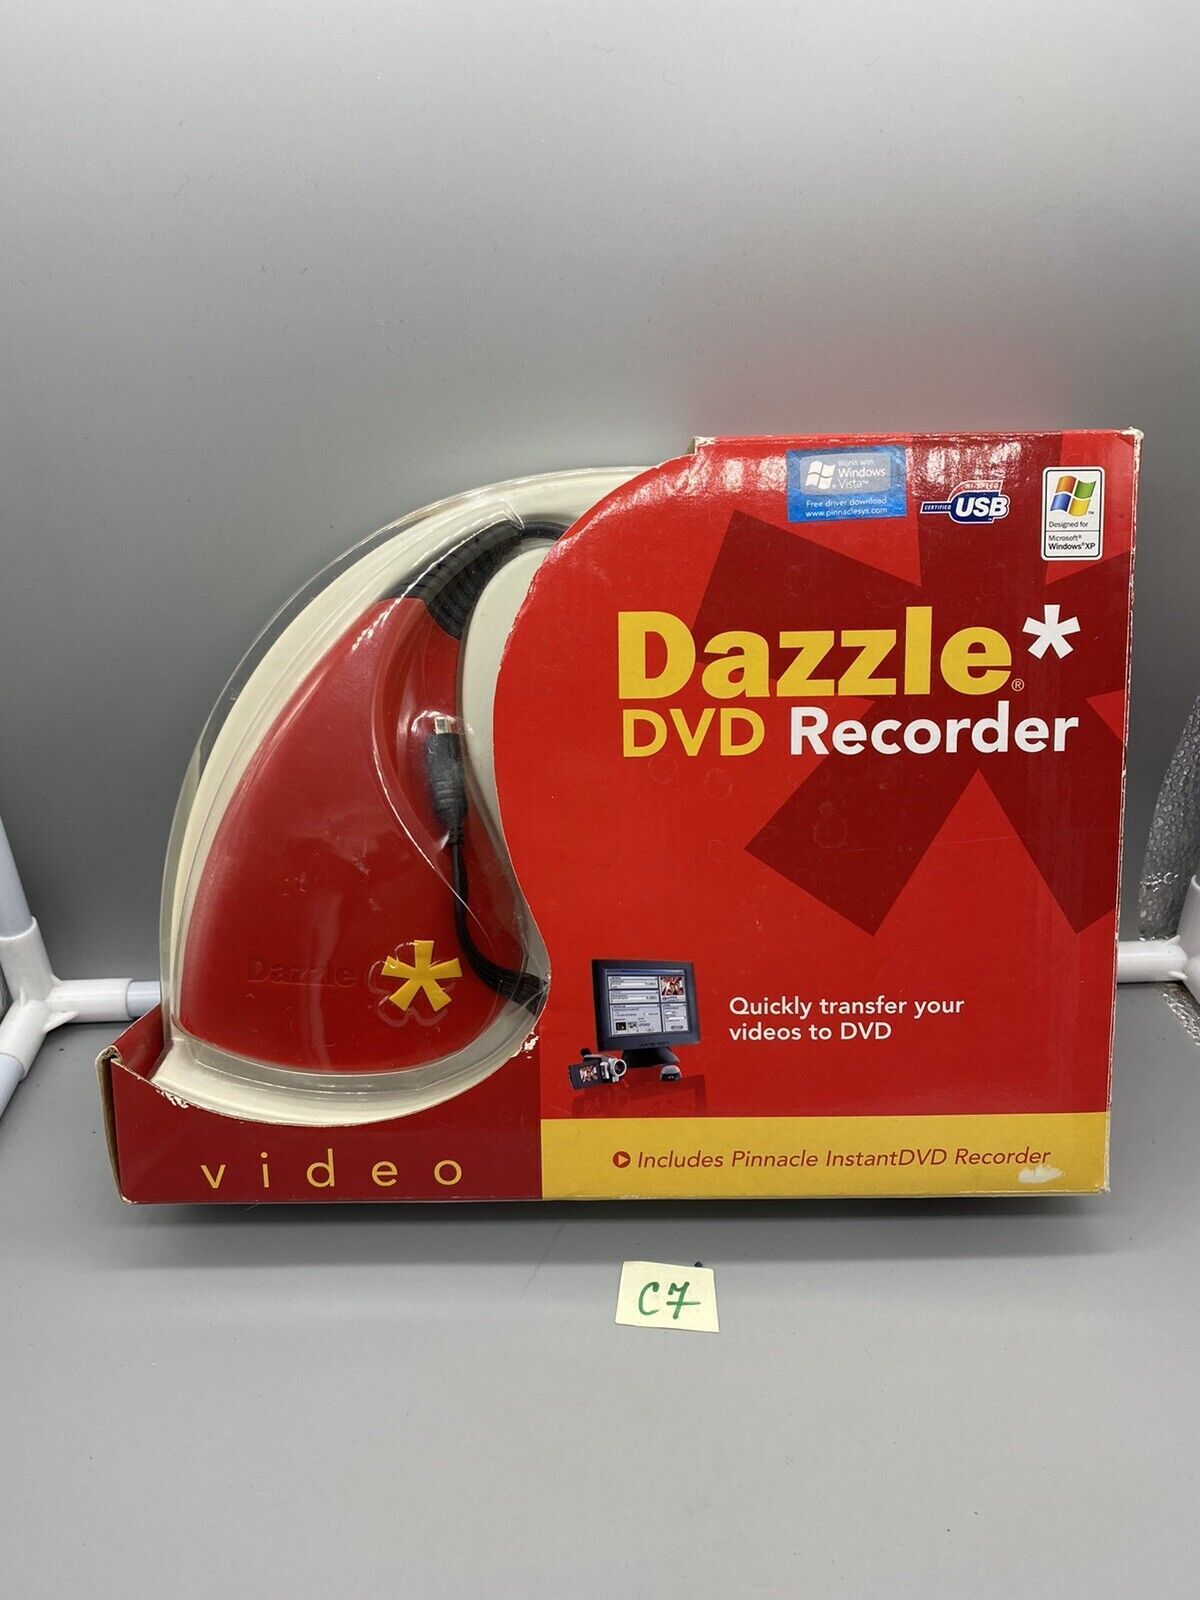 Dazzle DVD Recorder Save Enhance Share Capture Video Includes Pinnacle Studio